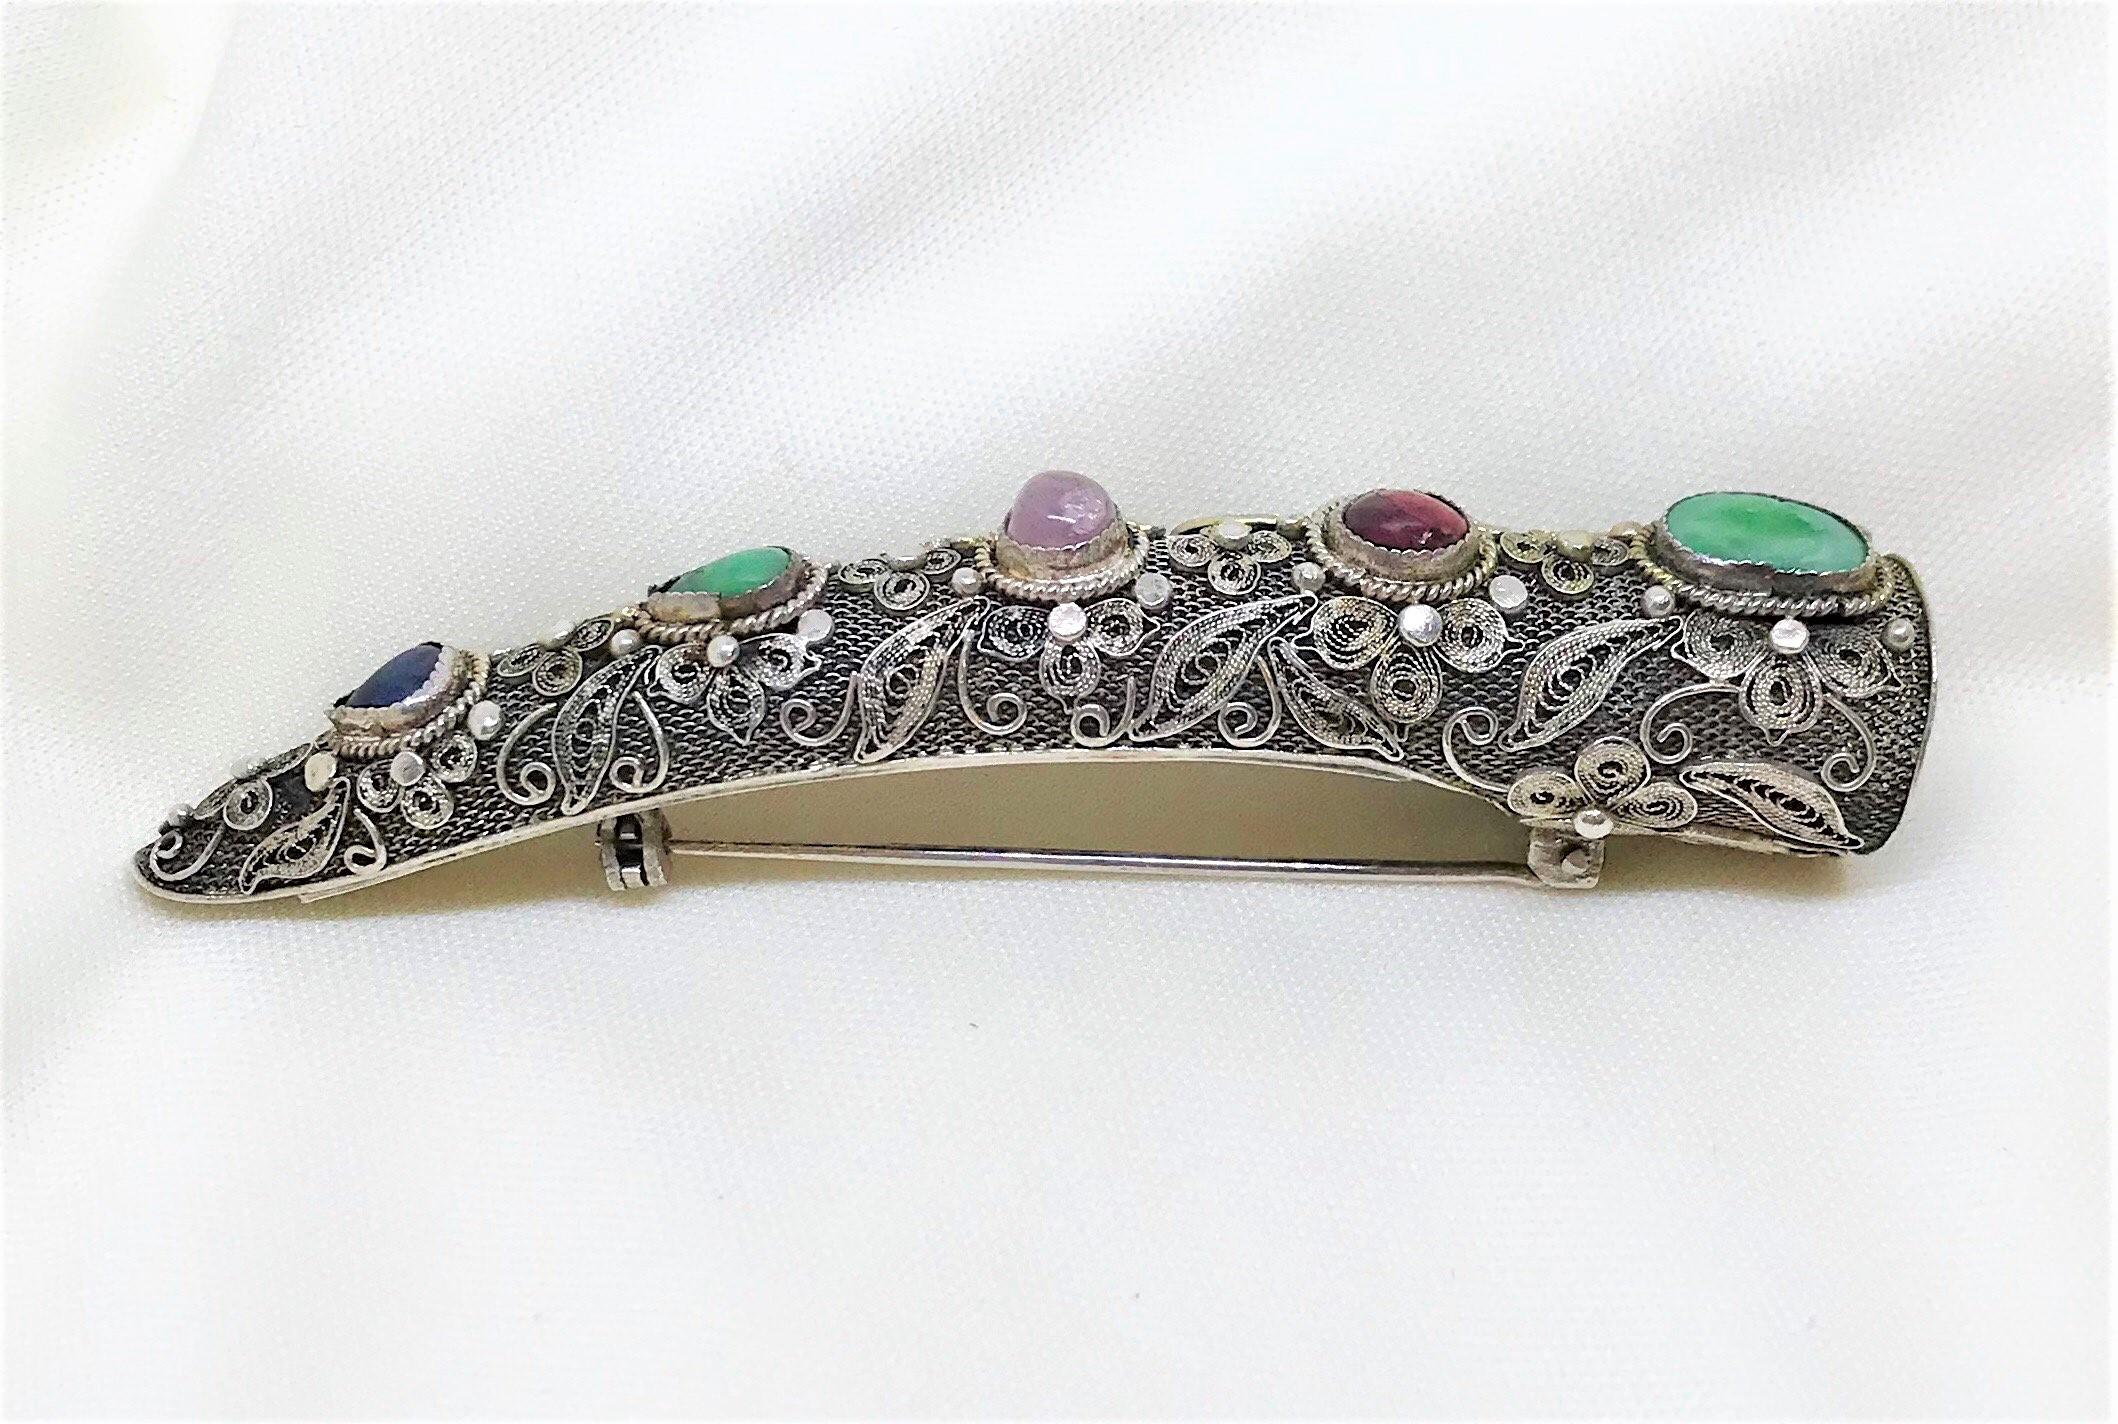 Circa 1930s to 1940s Chinese sterling silver nail cover brooch embellished with ornate floral filigree designs and bezel set with jade, amethyst and lapis stones.  It measures 3.25